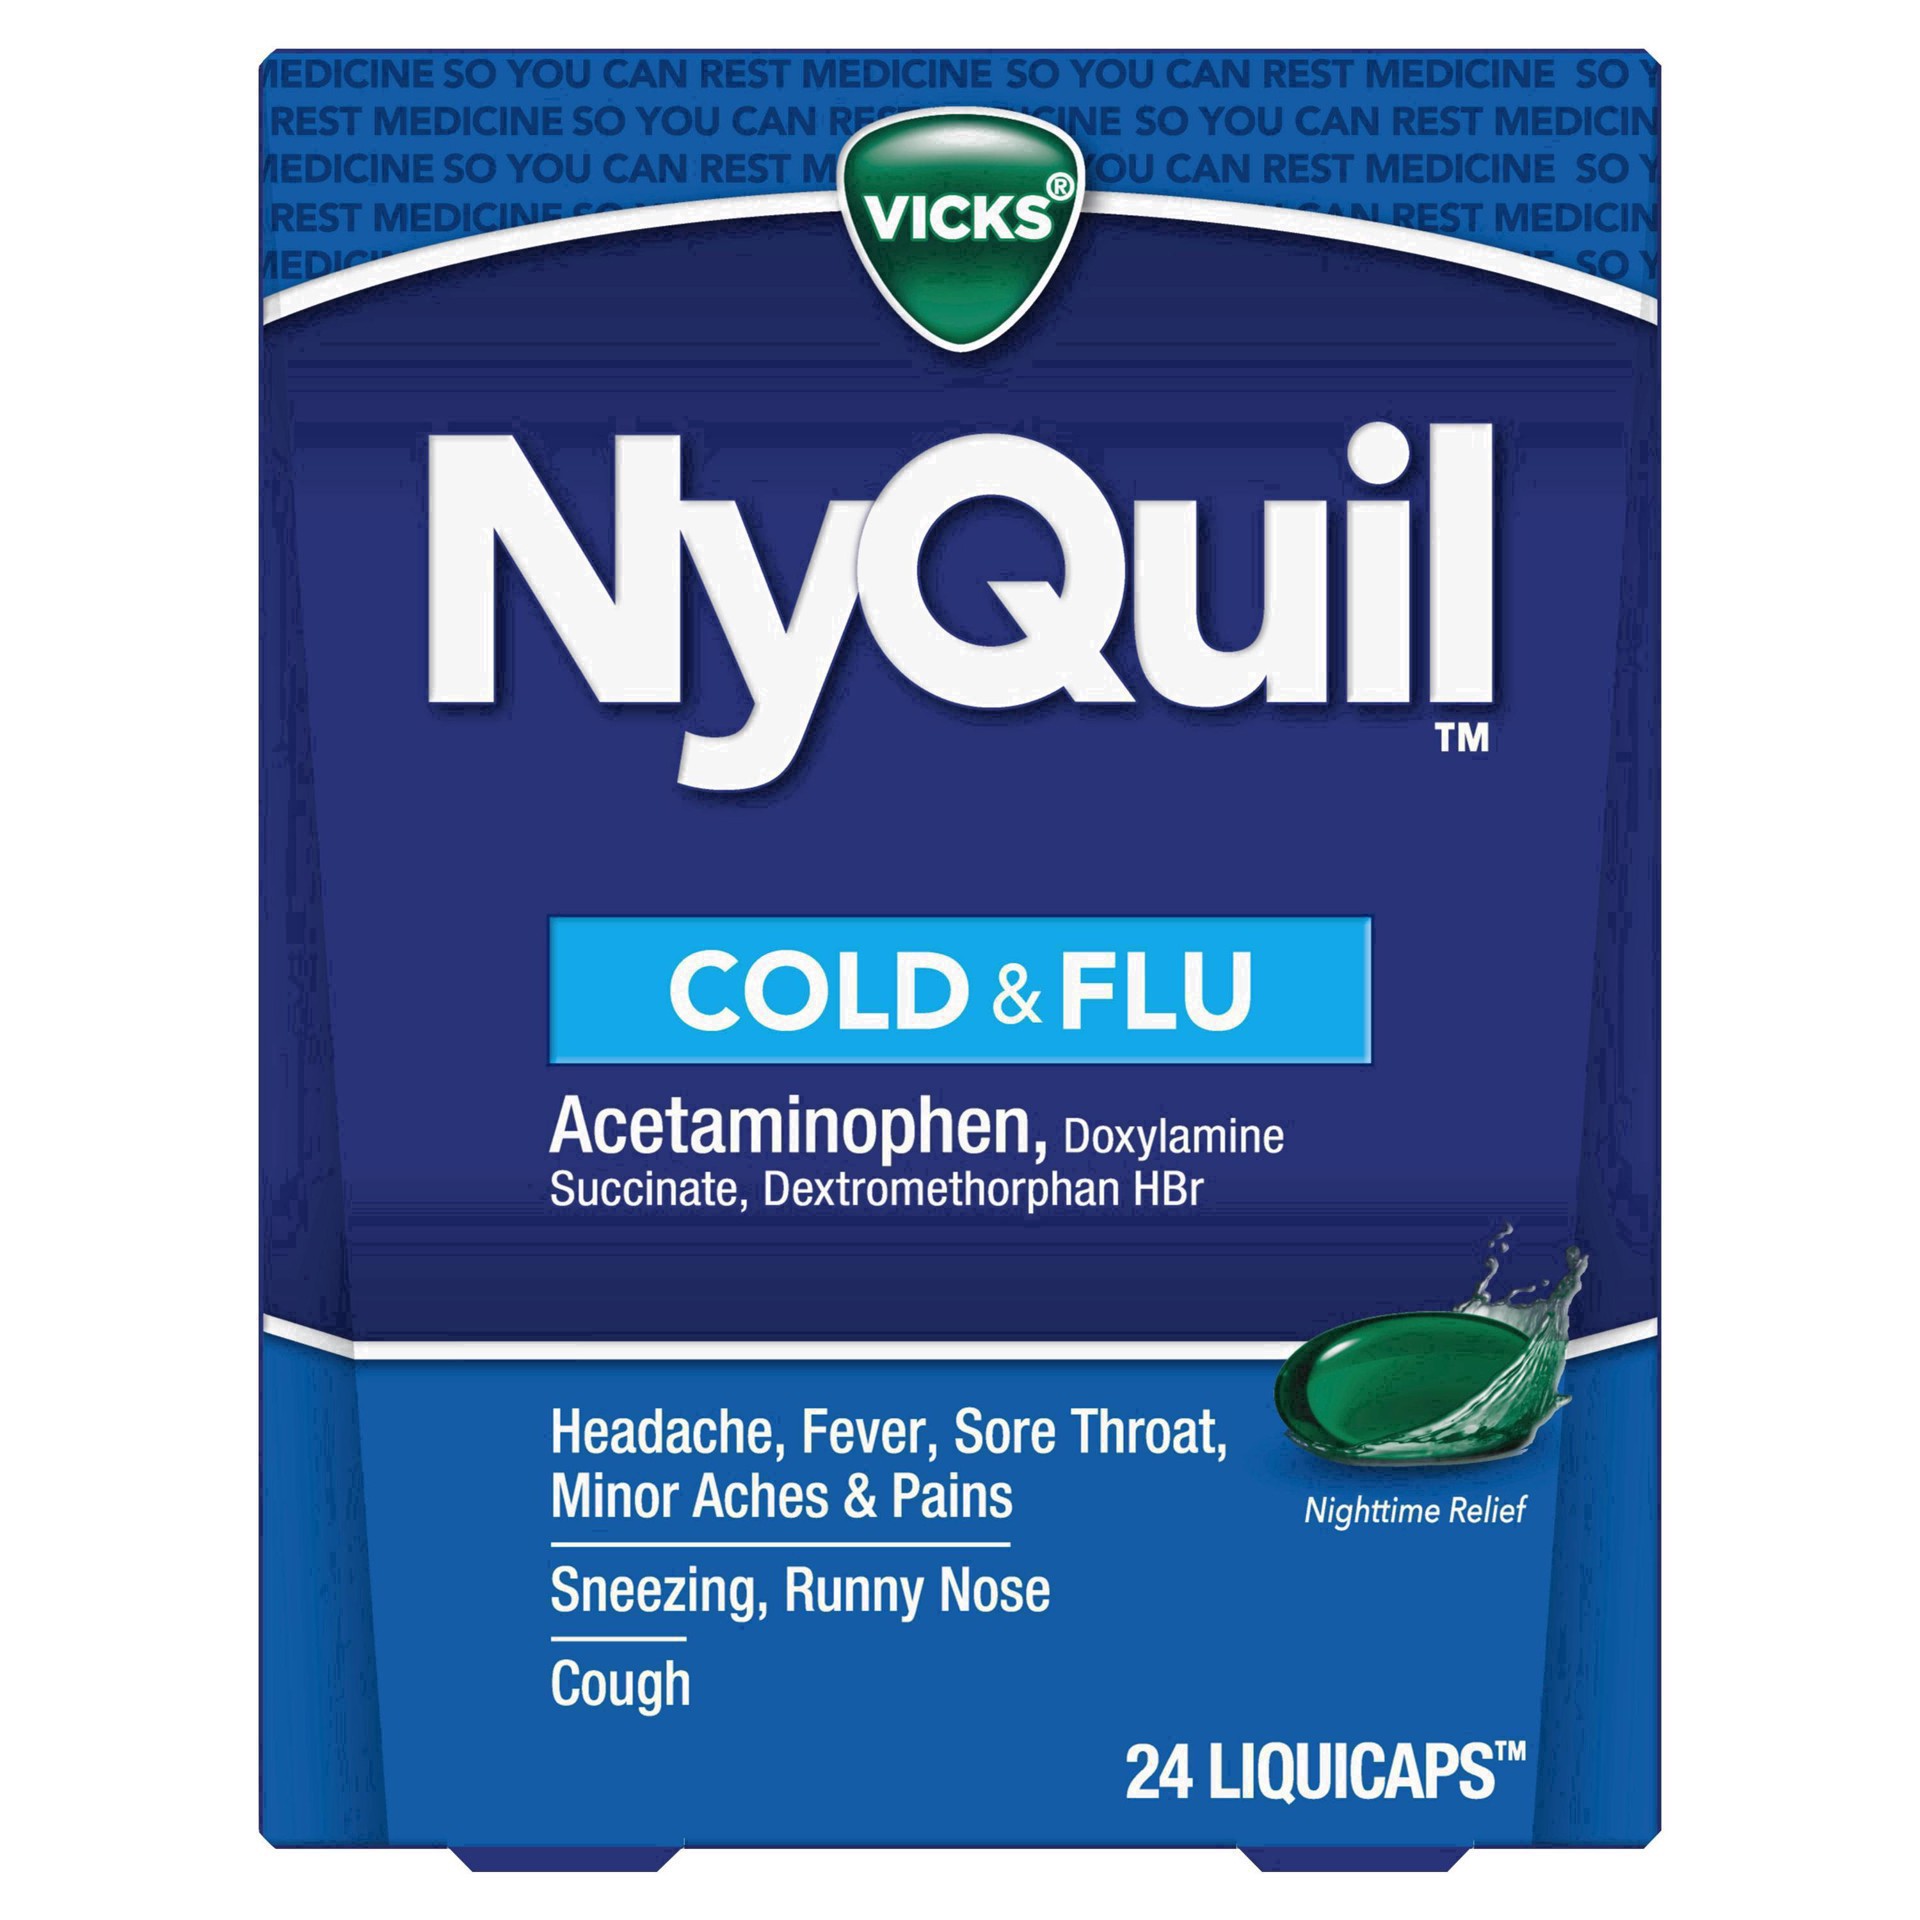 slide 19 of 68, NyQuil Vicks NyQuil Cold & Flu Medicine LiquiCaps - 24ct, 24 ct